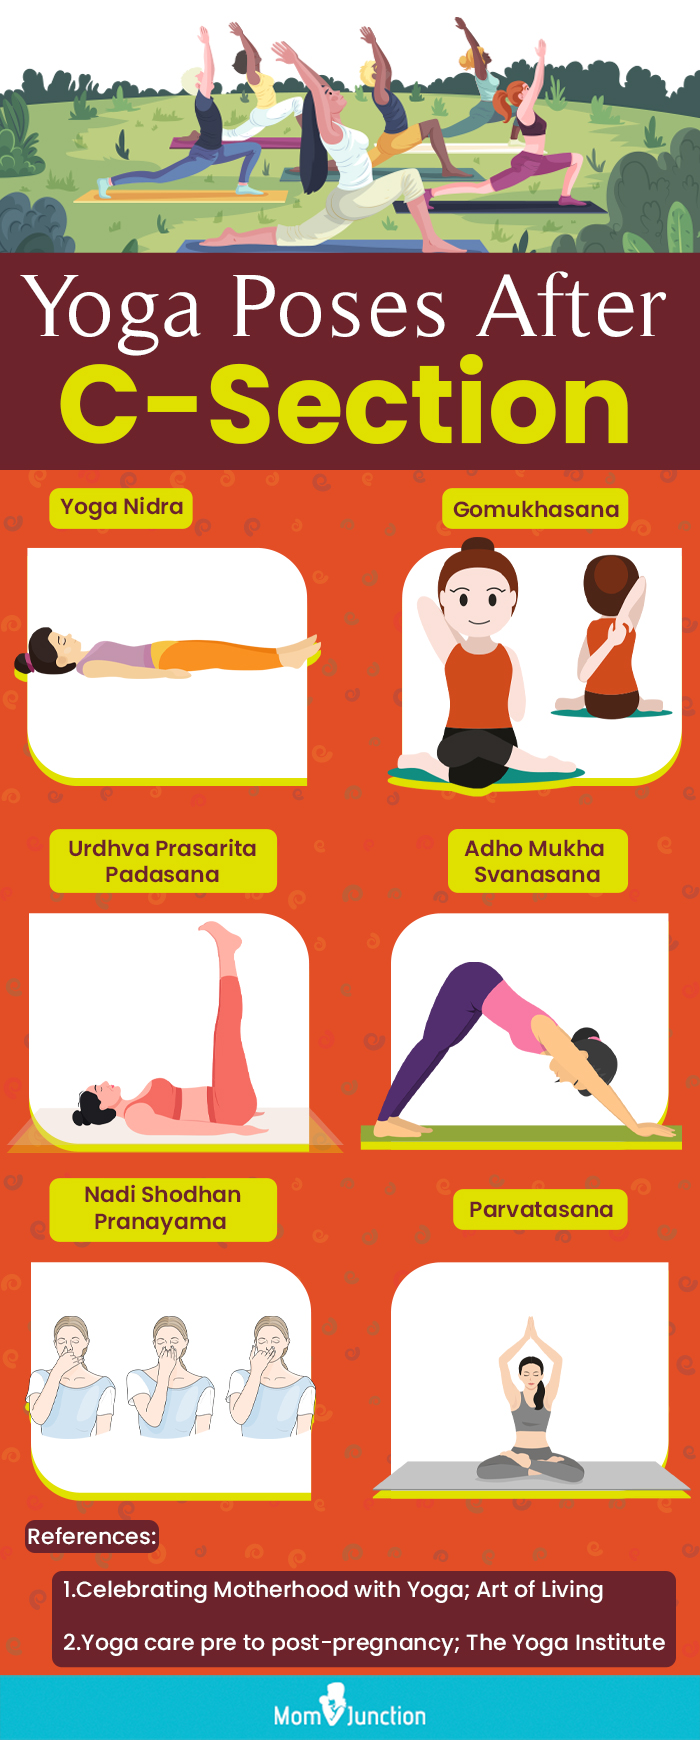 9 Yoga Modifications for Pregnancy and How to Teach Them